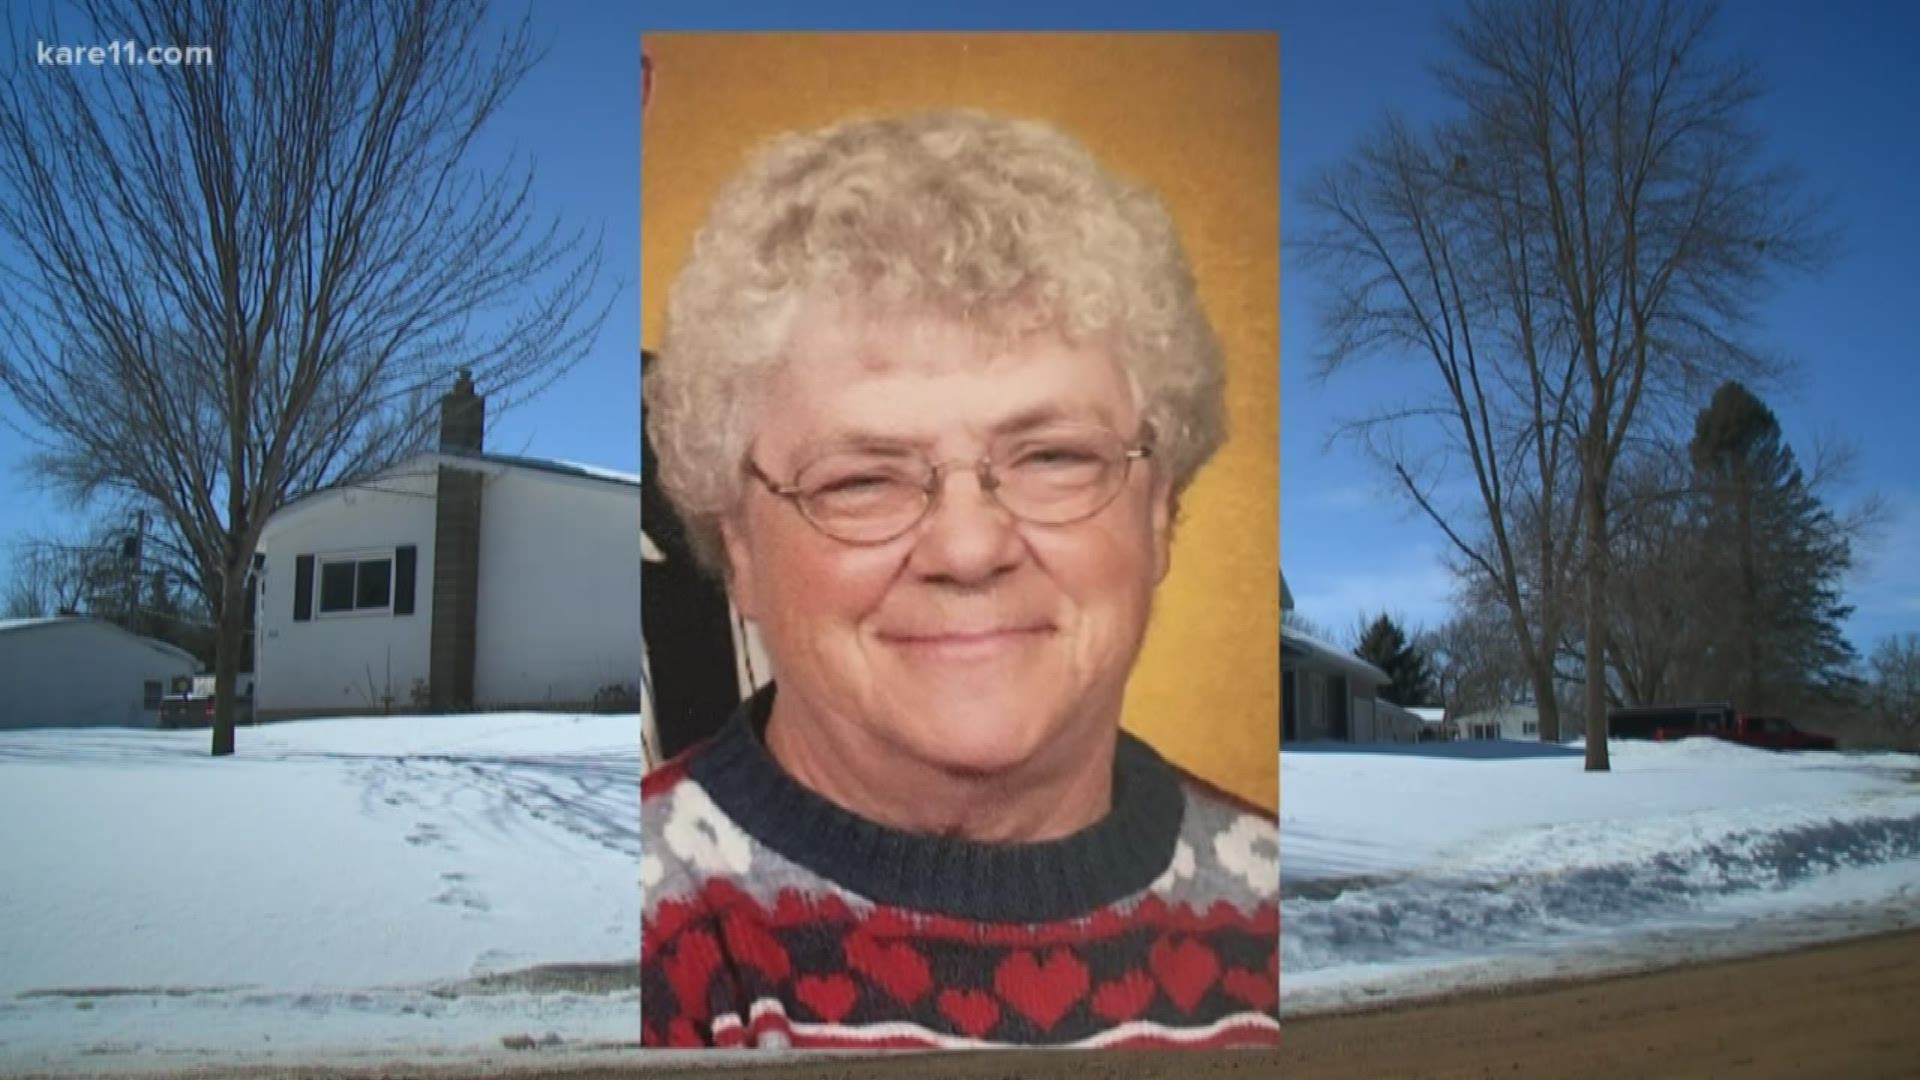 76-year-old Evelyn Adams was home alone when she was attacked during a blizzard. Her family and law enforcement are pushing for tips on the one-year anniversary